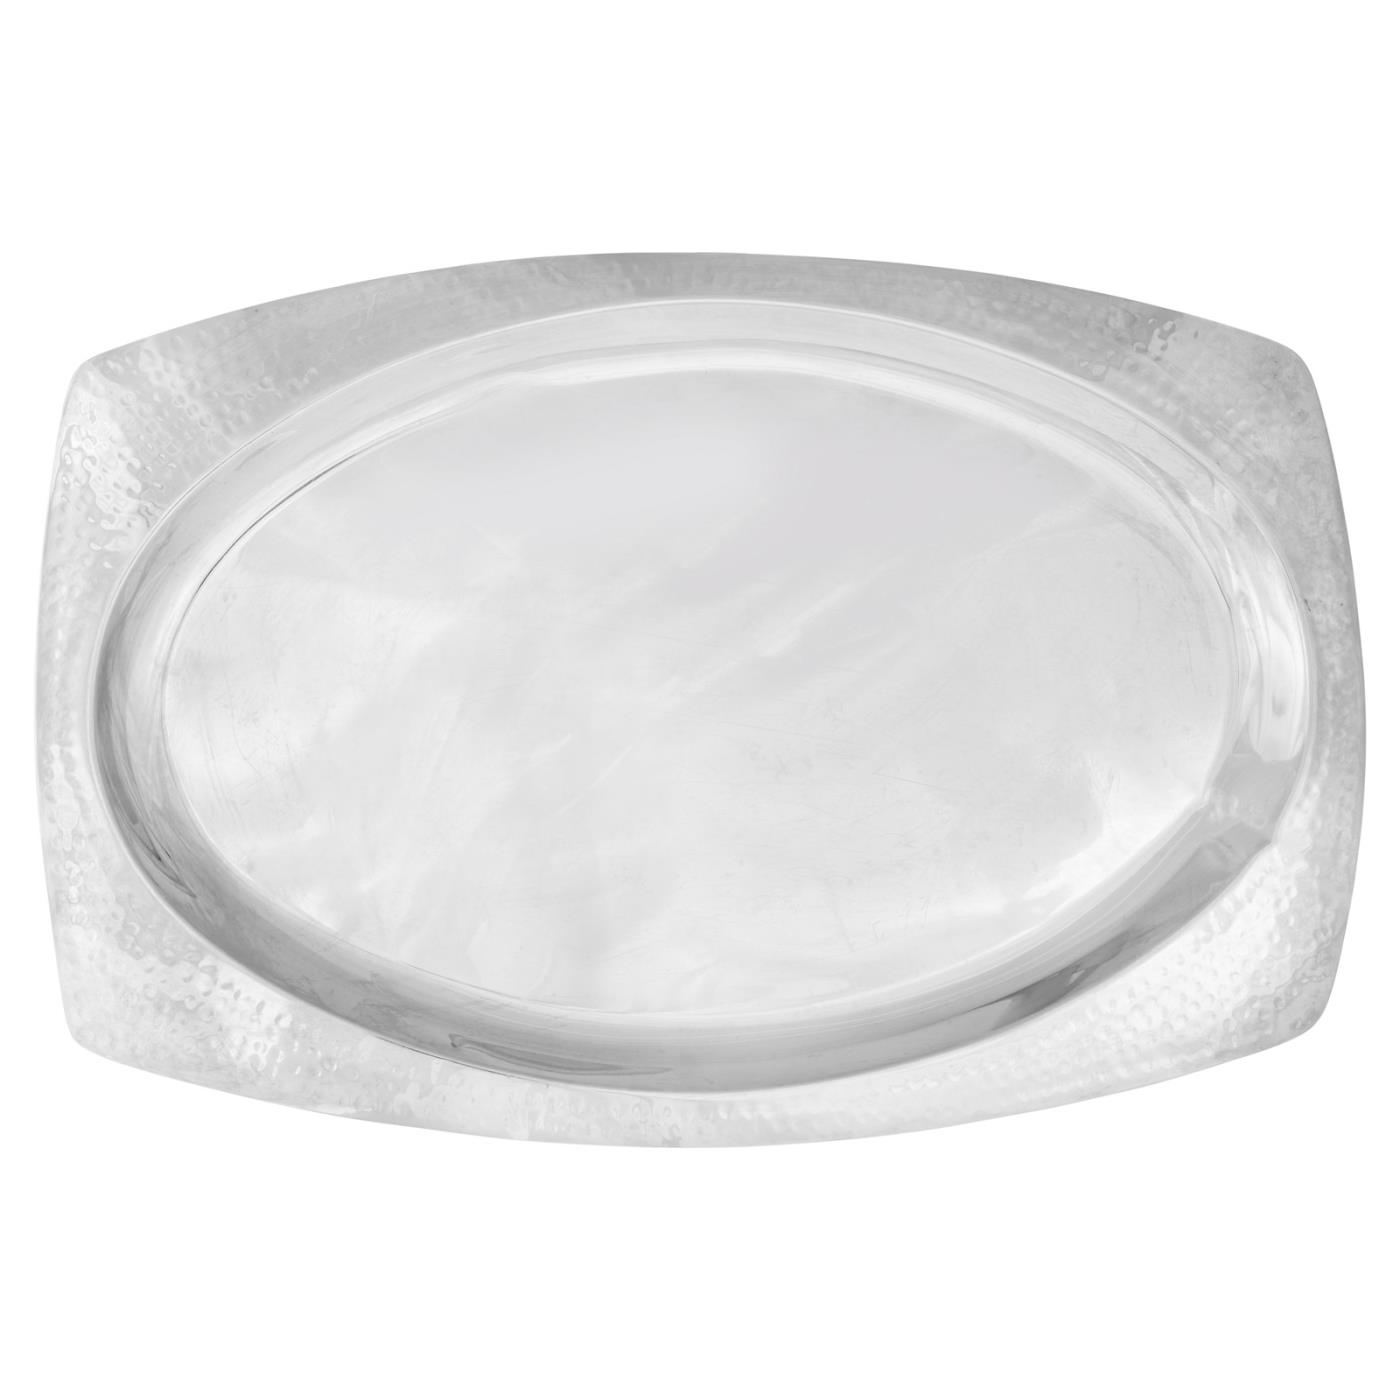 Hammered Rim Oval Tray 22